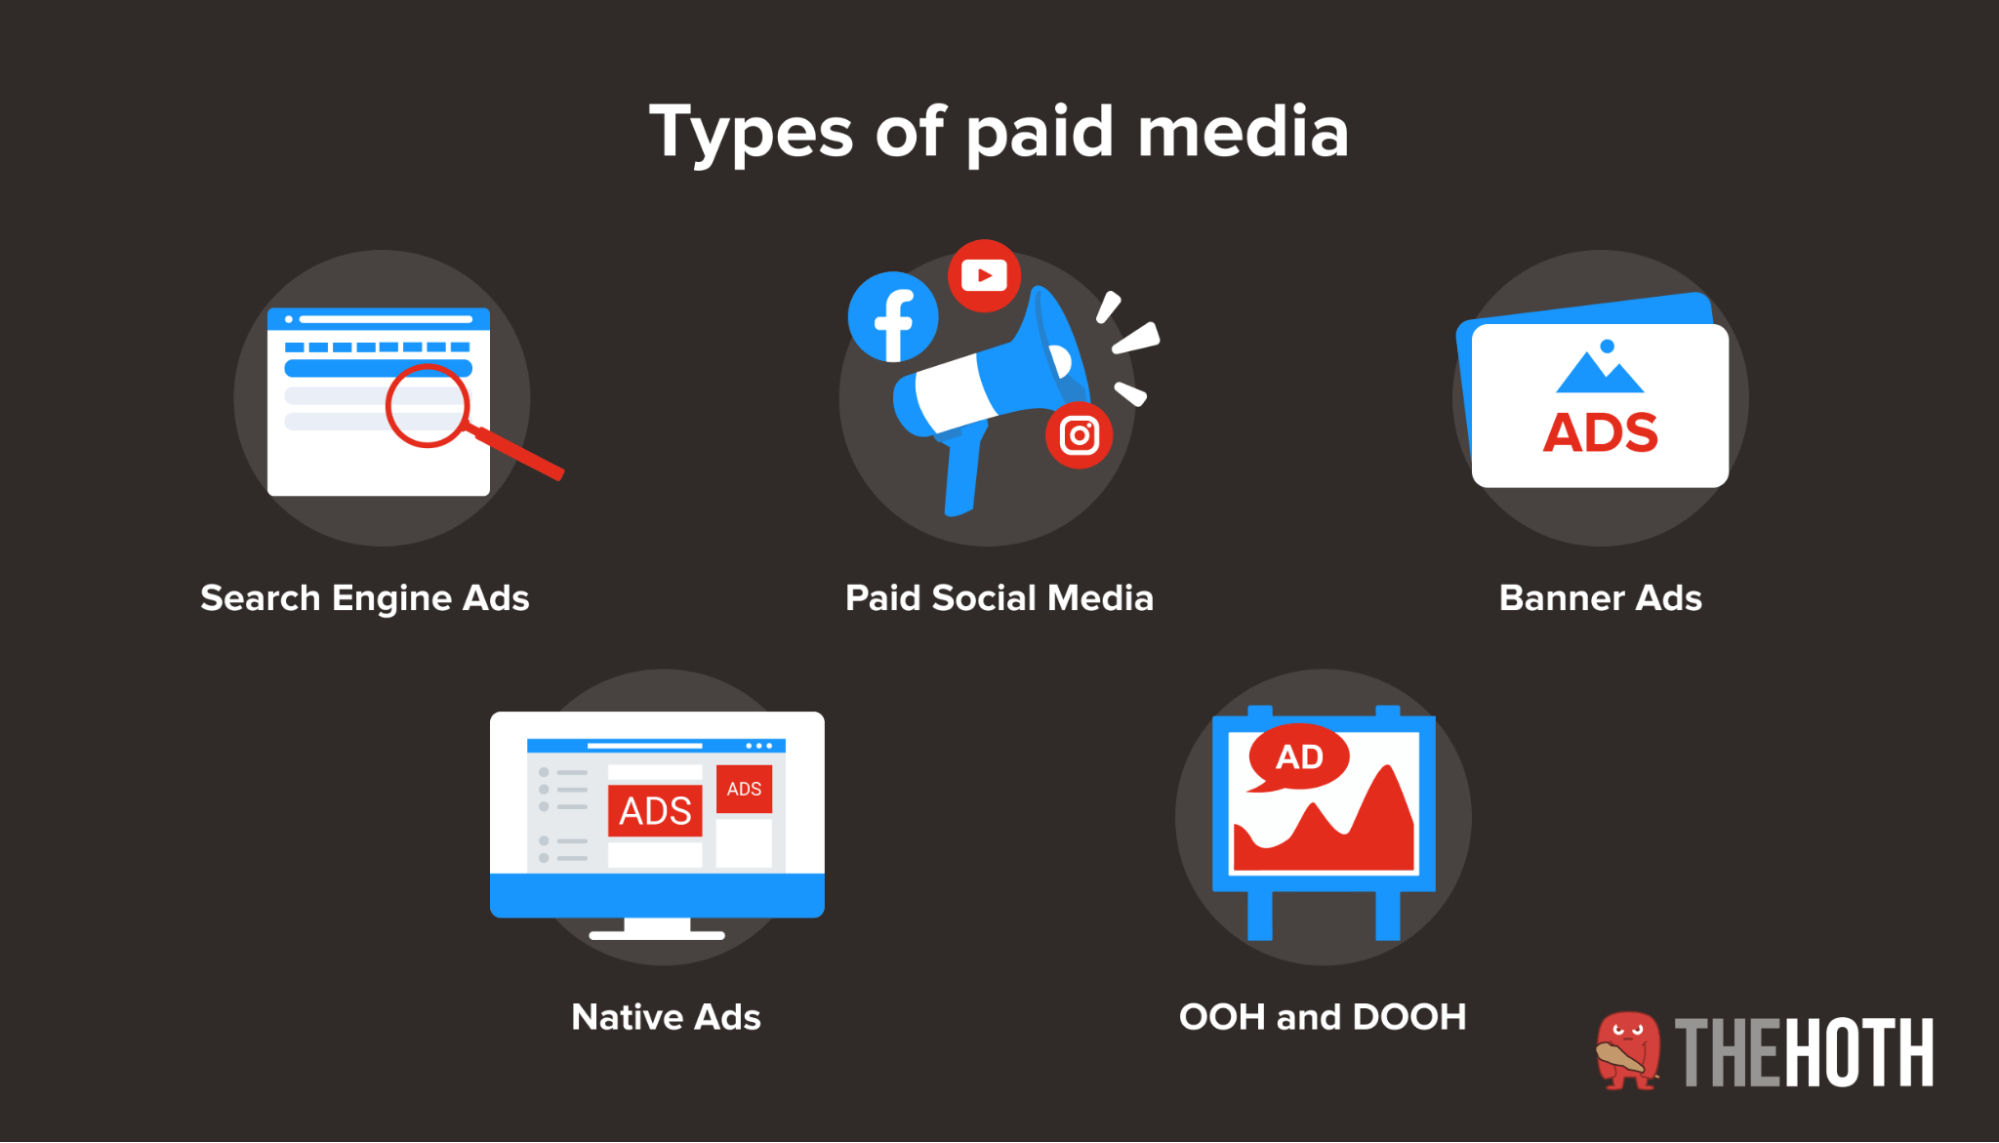 The 5 major types of paid media